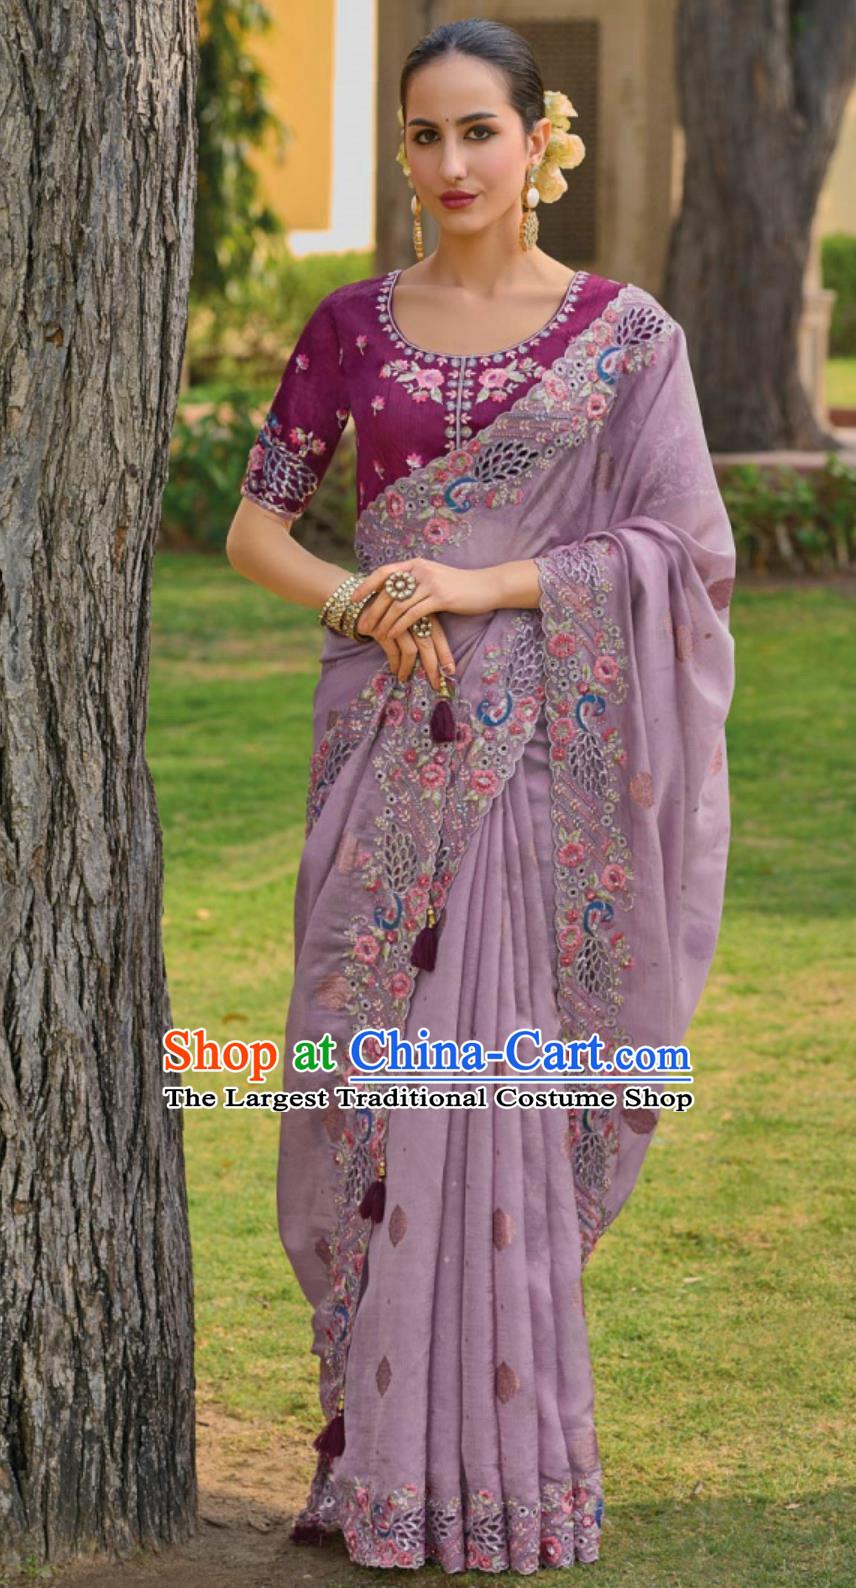 Hollow Embroidery Indian Saree National Ladies Violet Wrap Skirt Sari Festival Party Outfit